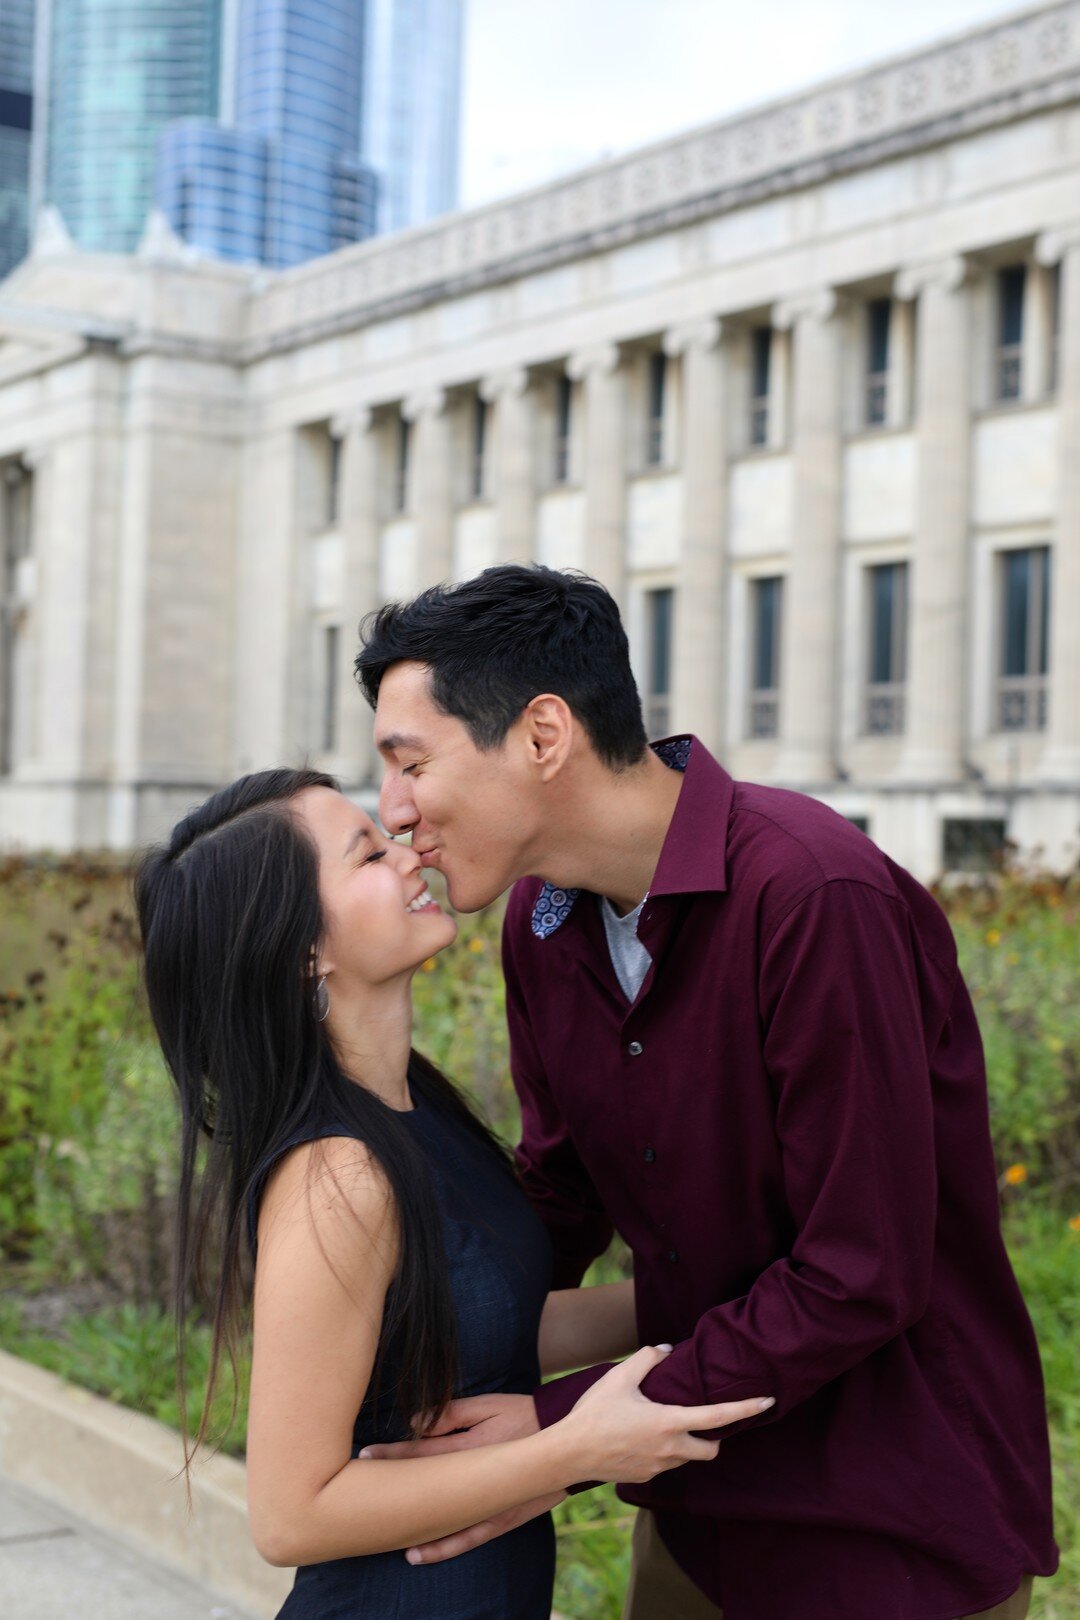 Chic Downtown Chicago Engagement Session captured by Abigail Grace Photography. See more engagement photo ideas on CHItheeWED.com!